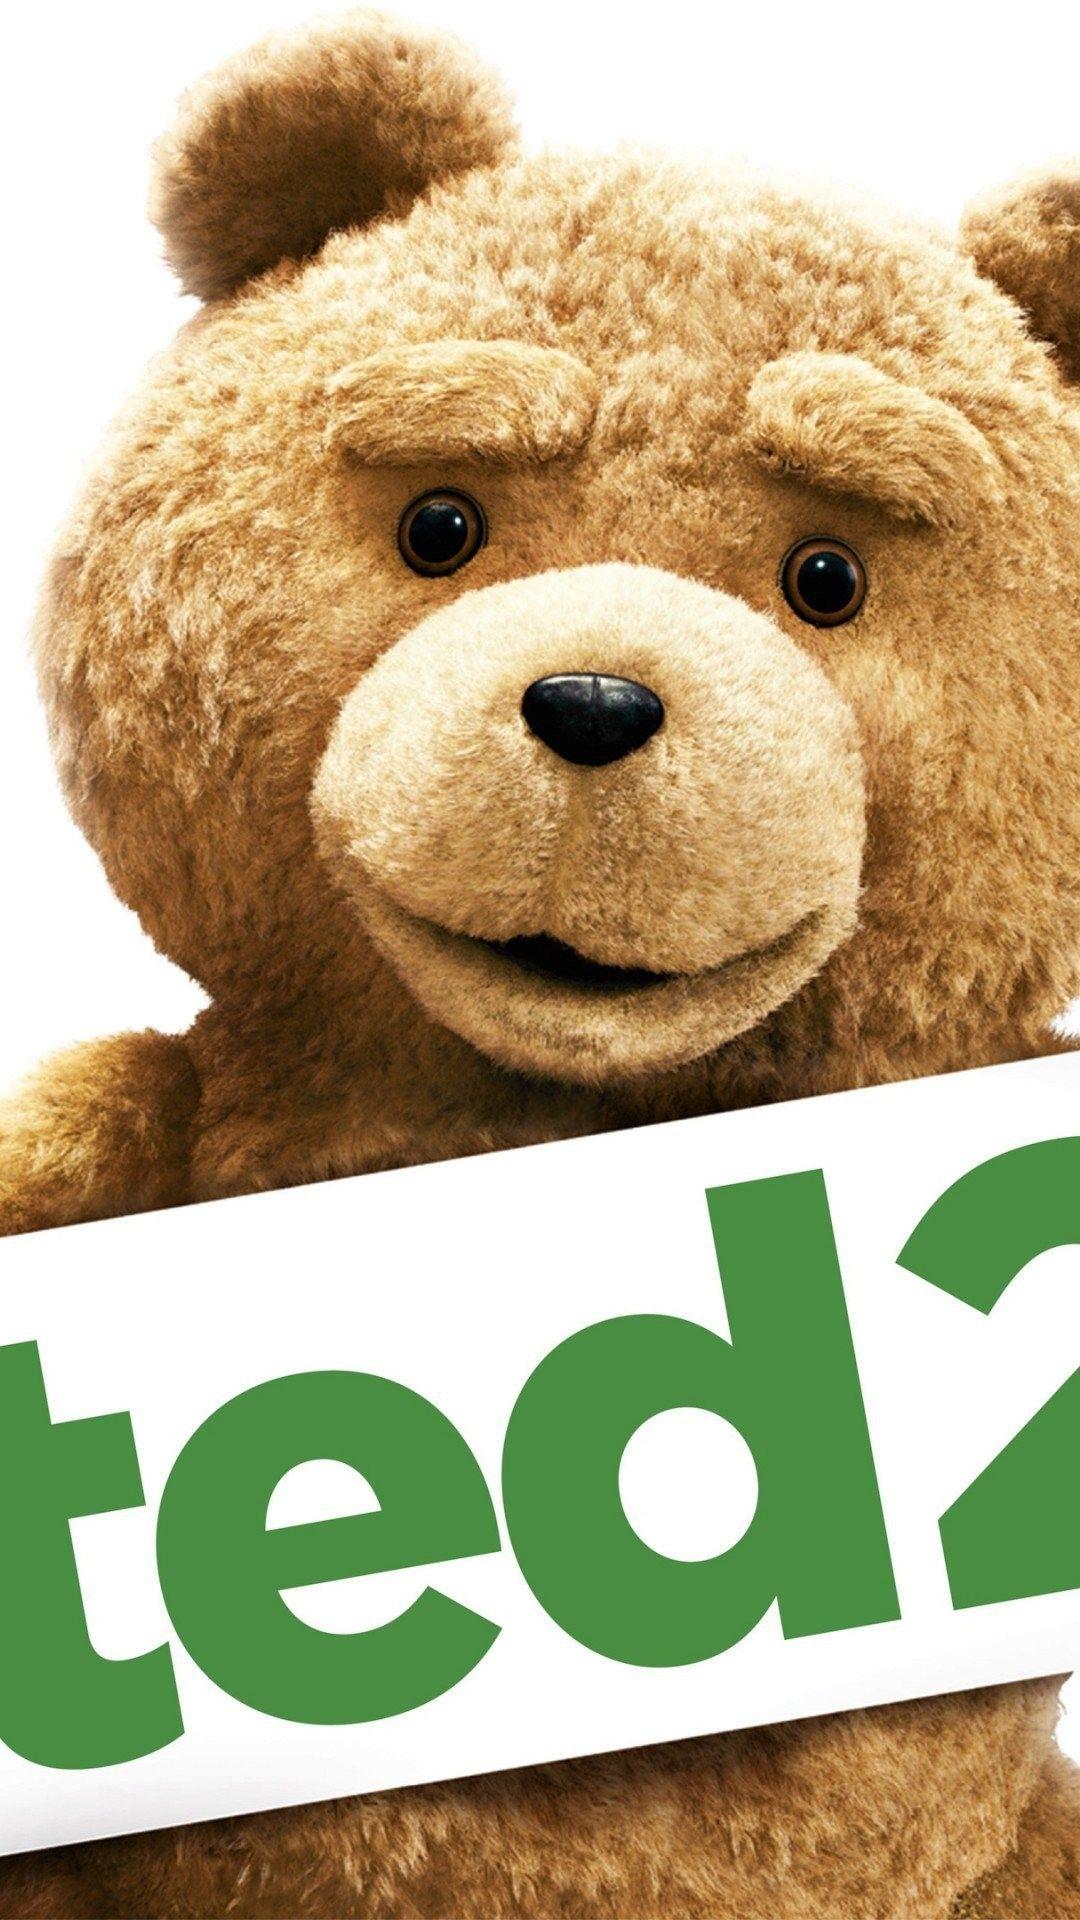 Ted HD Wallpaper for iPhone 7